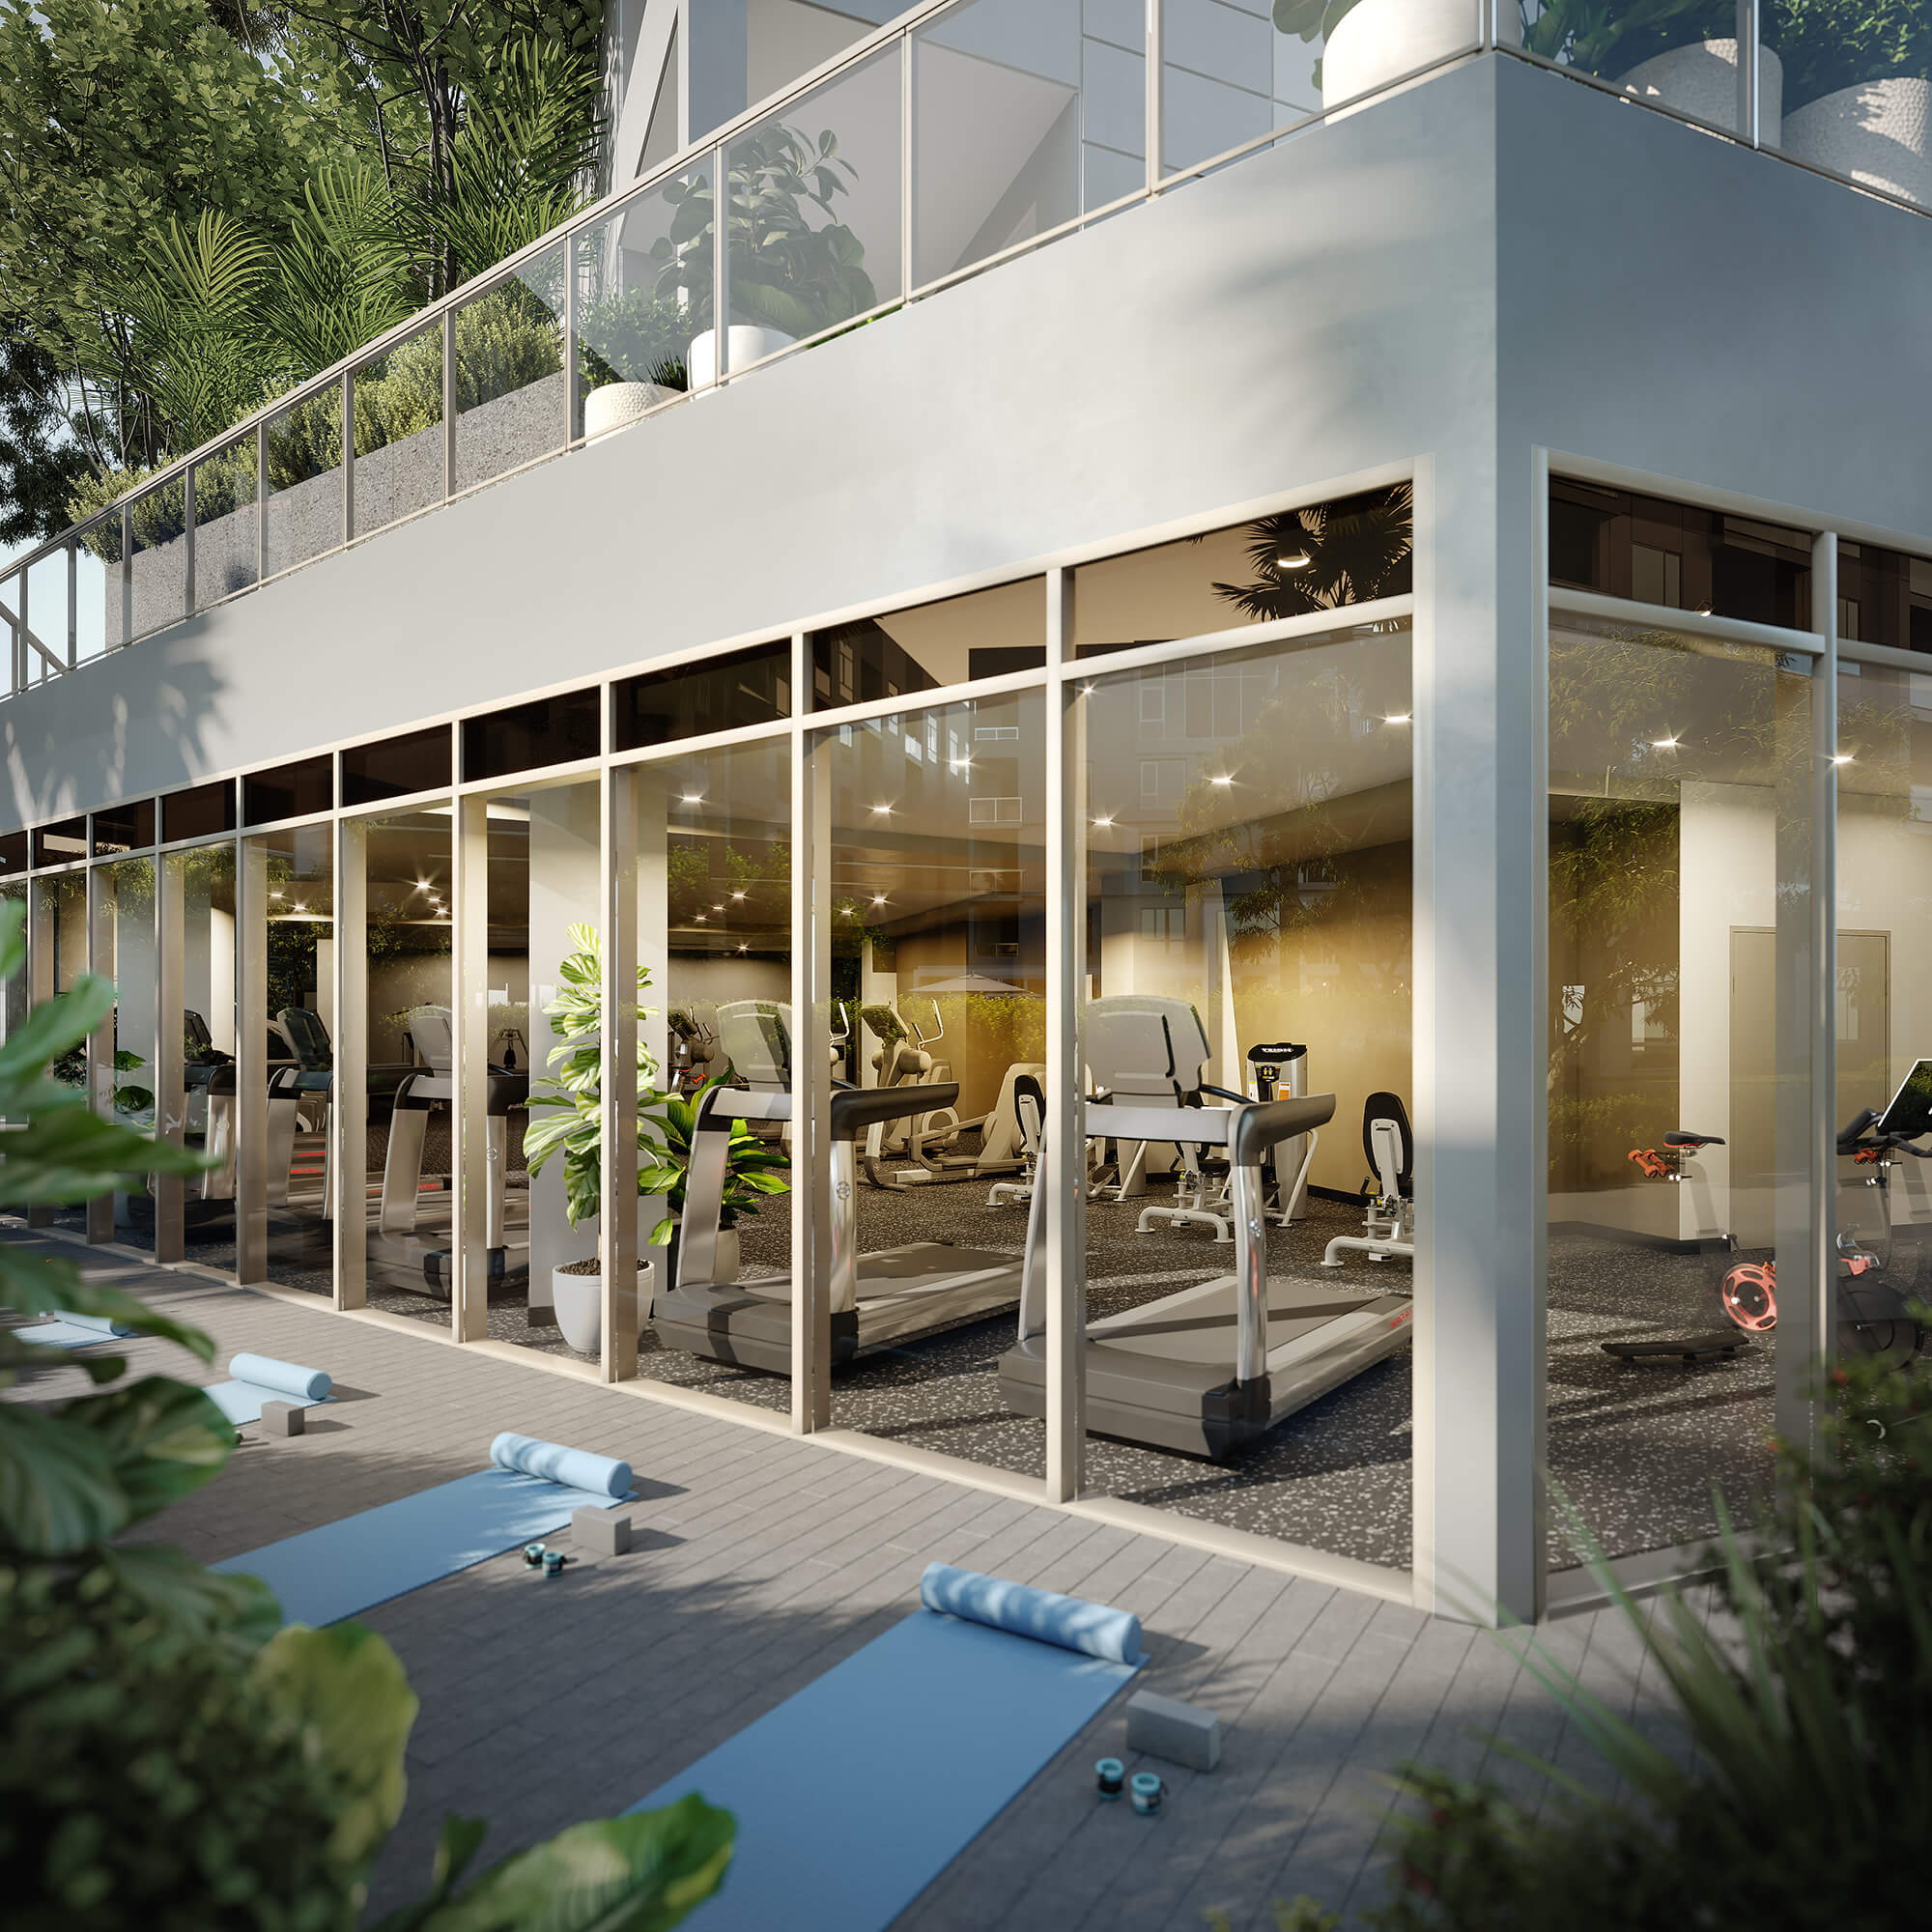 Exterior looking into fitness room with yoga mats in foreground